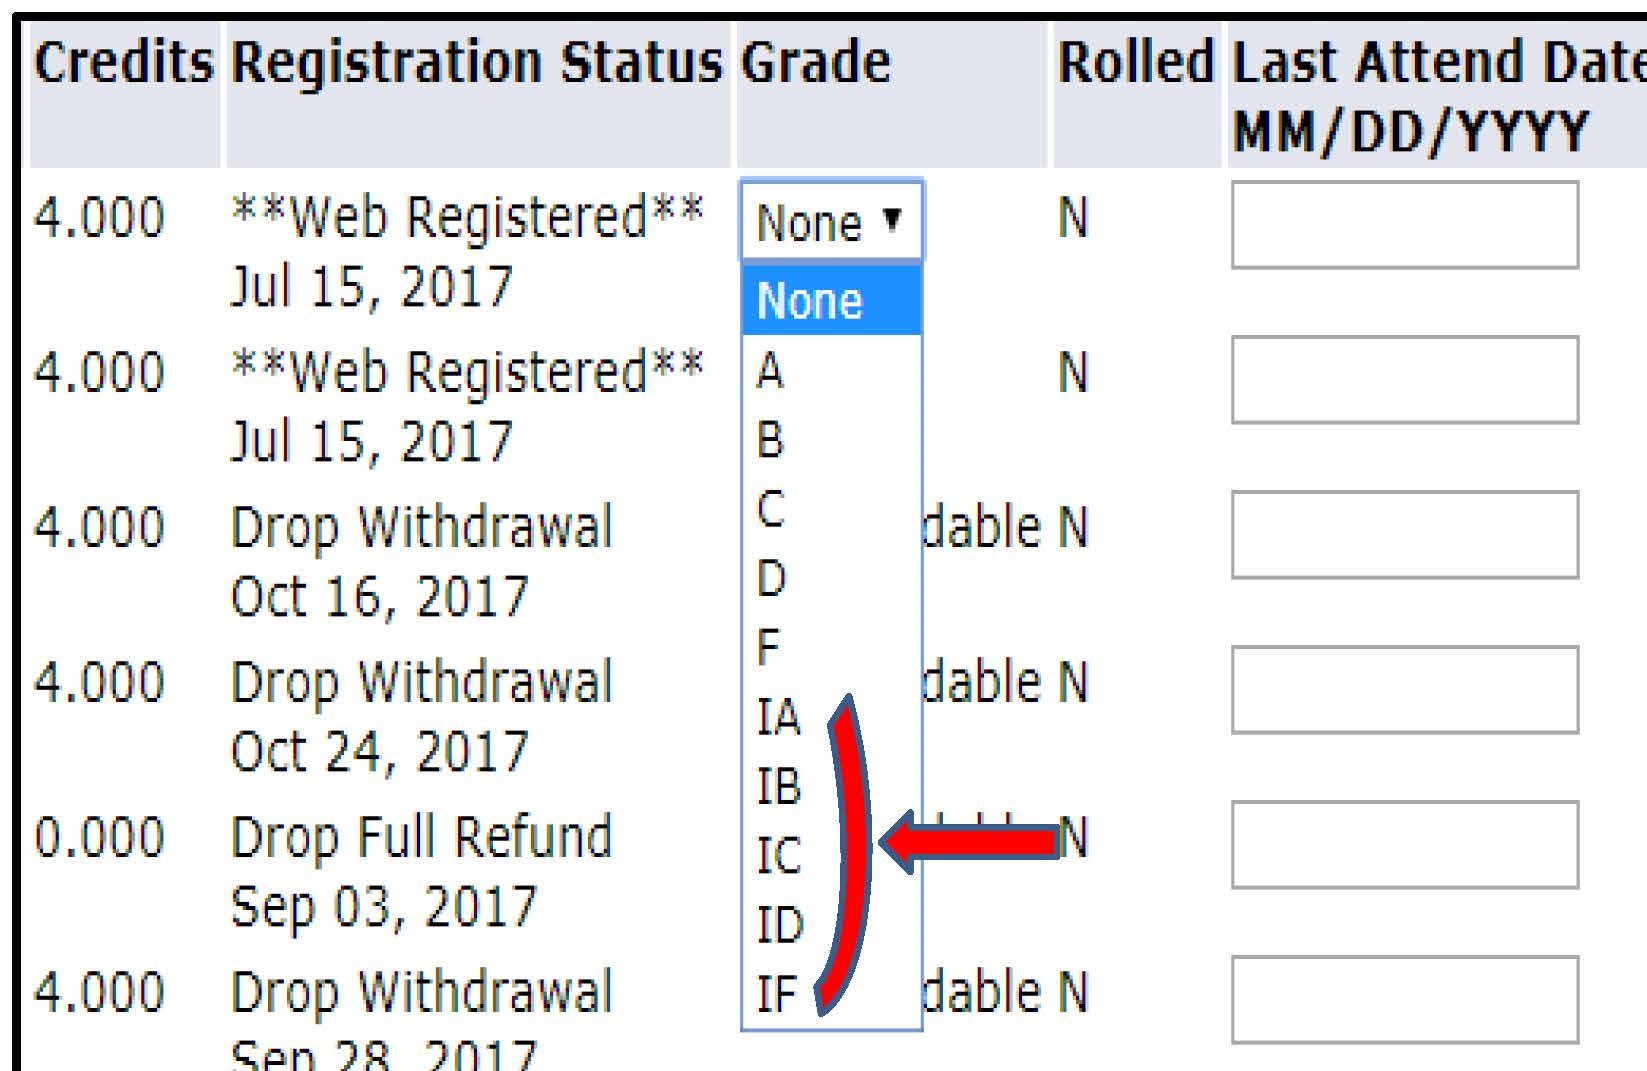 The drop down menu for assigning final grades also allows you to assign an incomplete. You can can choose from IA, IB, IC, ID, or IF.  The I indicates incomplete.  The A, B, C, D, or F indicates the letter grade they earned at the time the incomplete was granted.